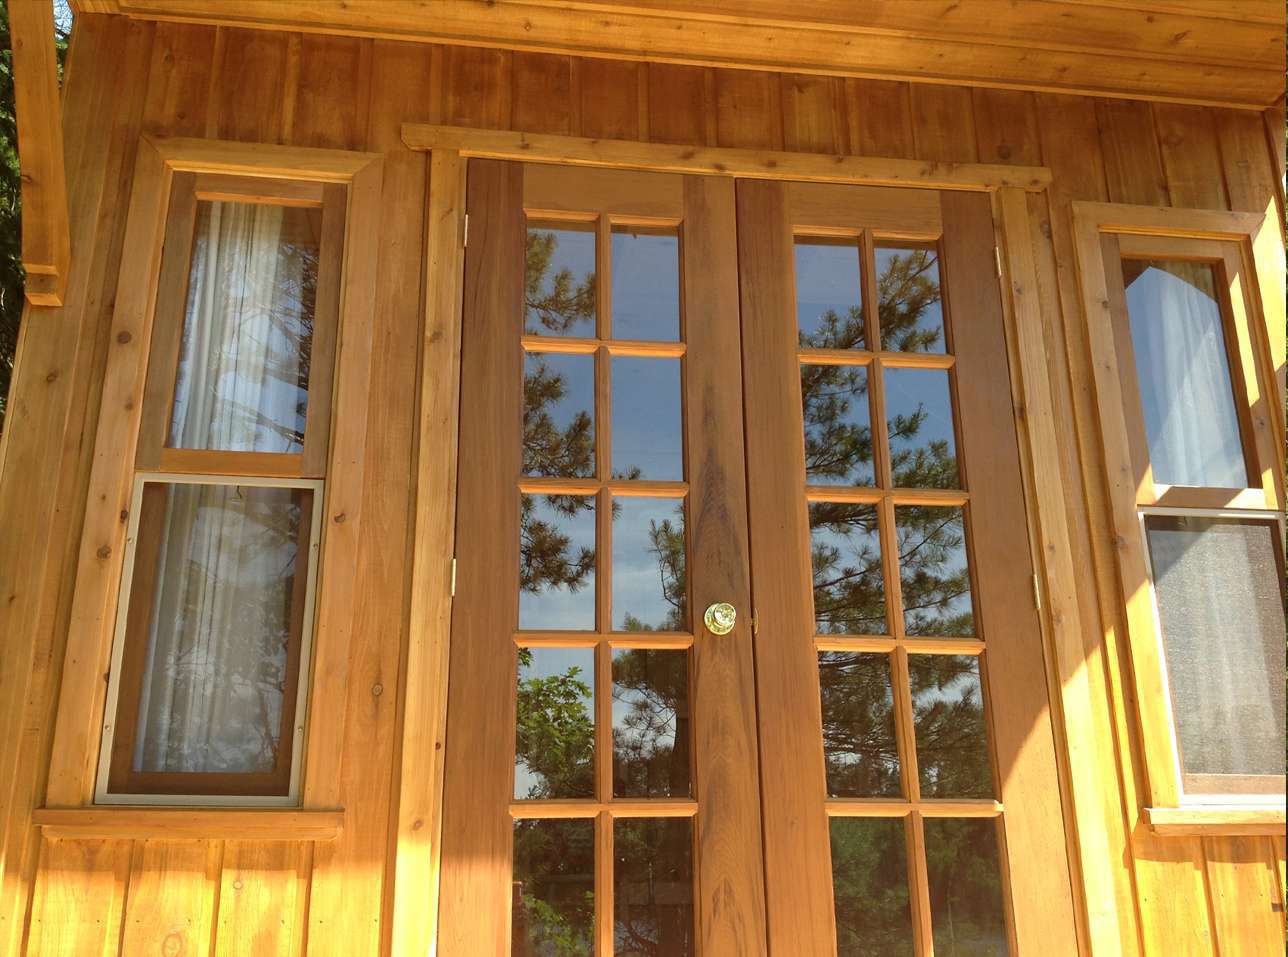 Custom Bala bunkie 10 x 10 with double french doors in Ontario. ID number 165870-2